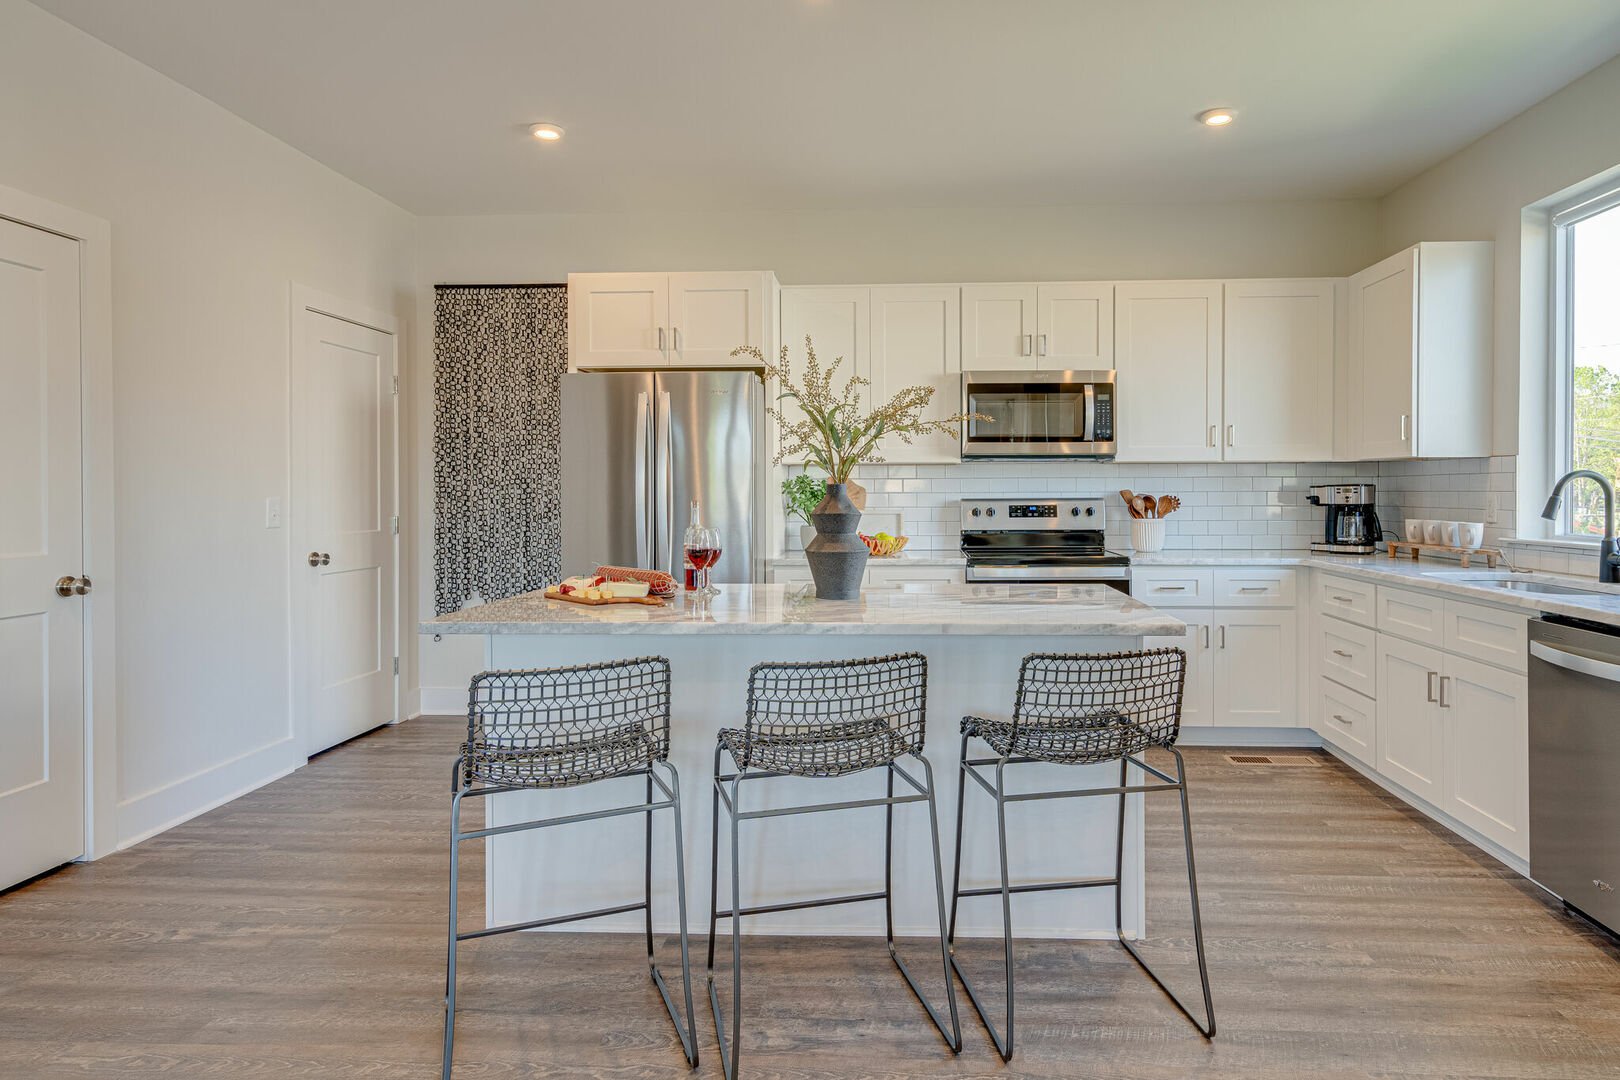 2nd Unit, 2nd Floor: Fully equipped kitchen stocked with basic cooking essentials and stainless steel appliances.